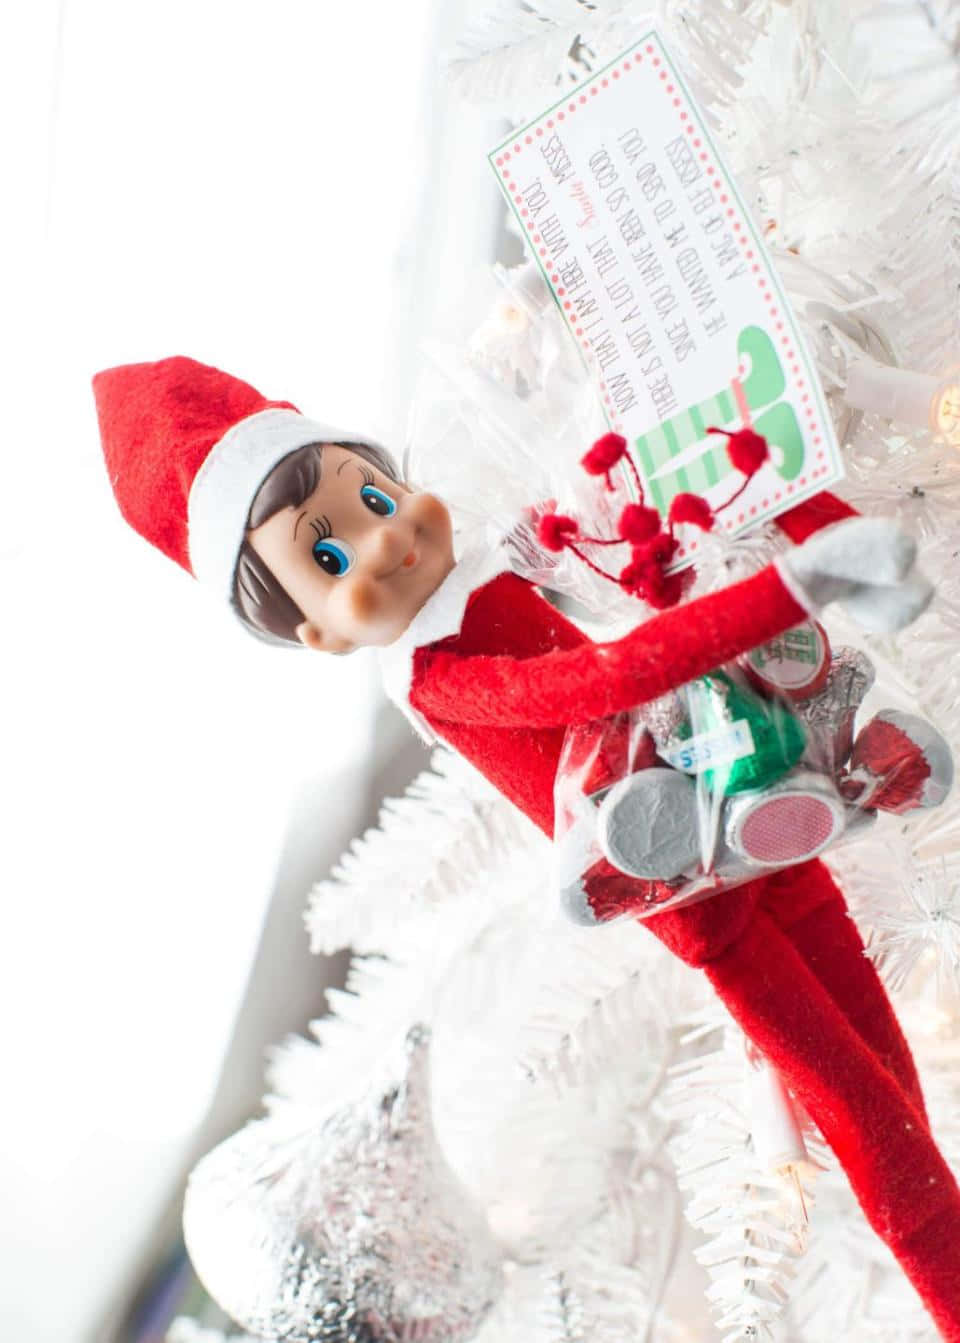 Celebrate the Holiday Season with Elf On The Shelf!